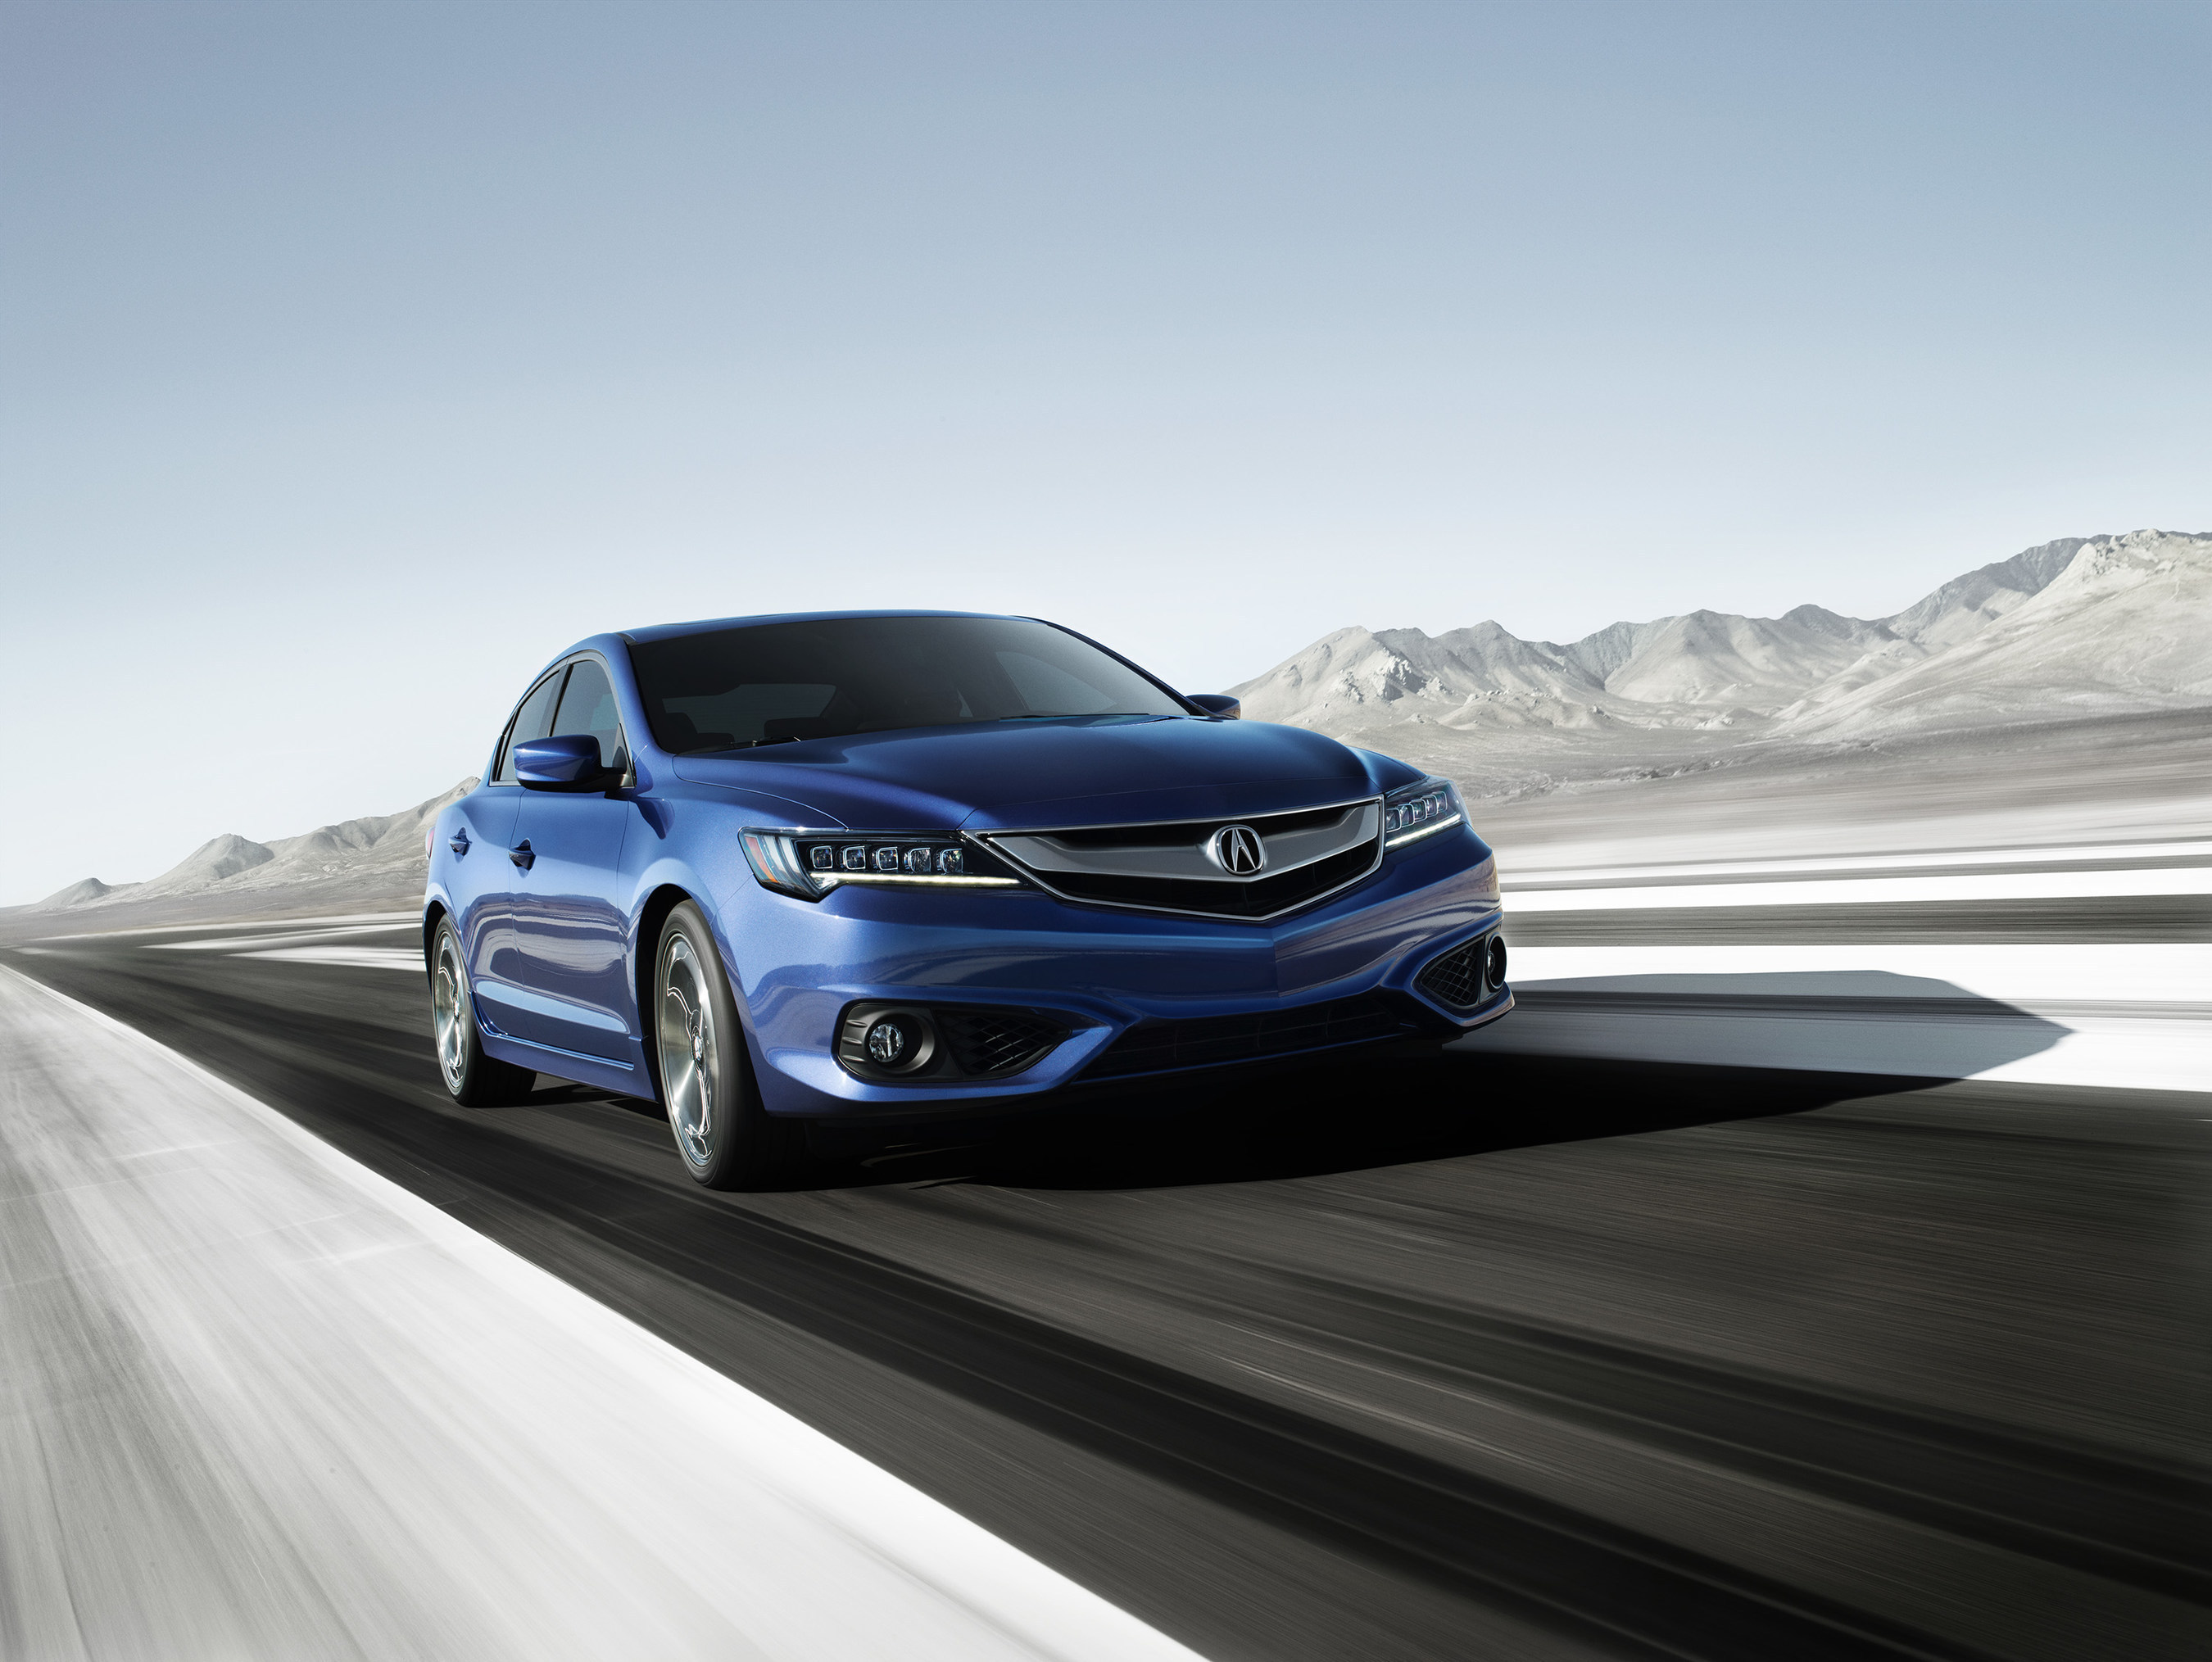 Acura Set to Launch More Powerful, Technologically Advanced and Luxuriously Equipped 2016 Acura ILX Sport Sedan